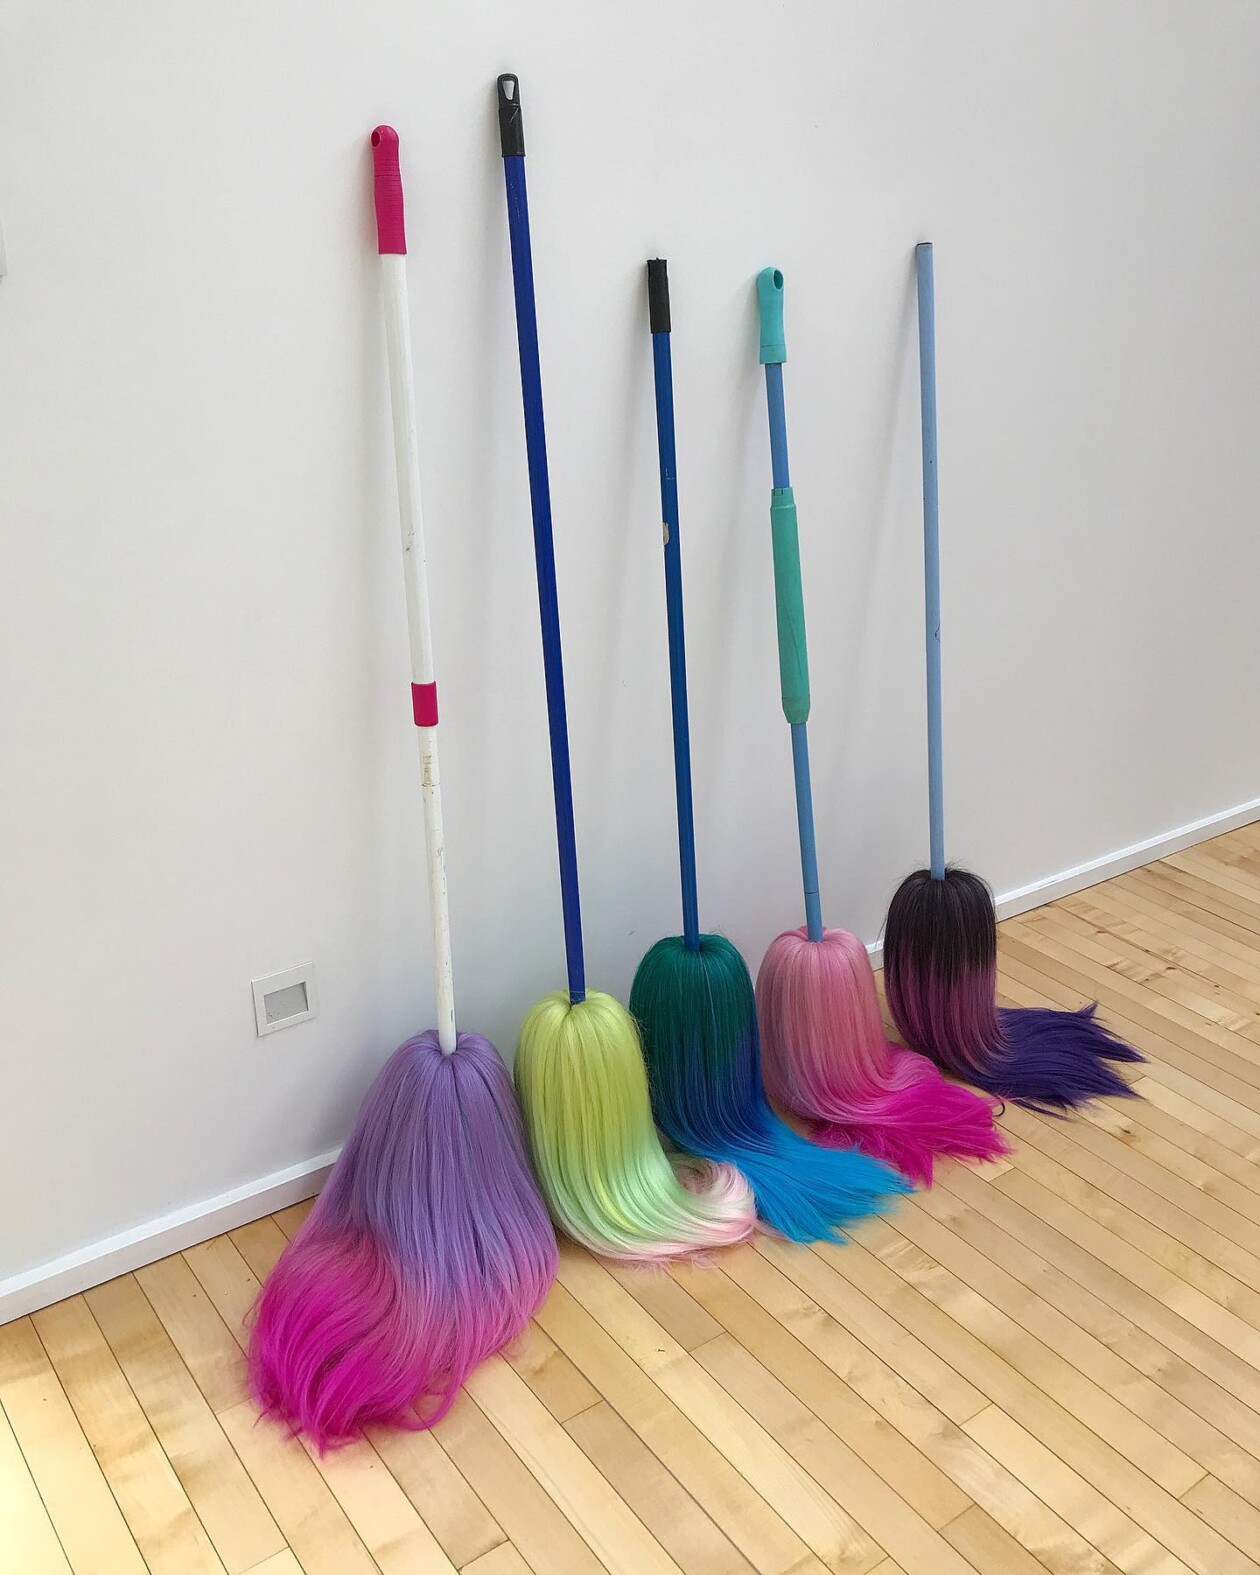 After The Waves (the Waifs) Surreal Sculptures Of Brooms With Human Hairs By Vincent Olinet (7)